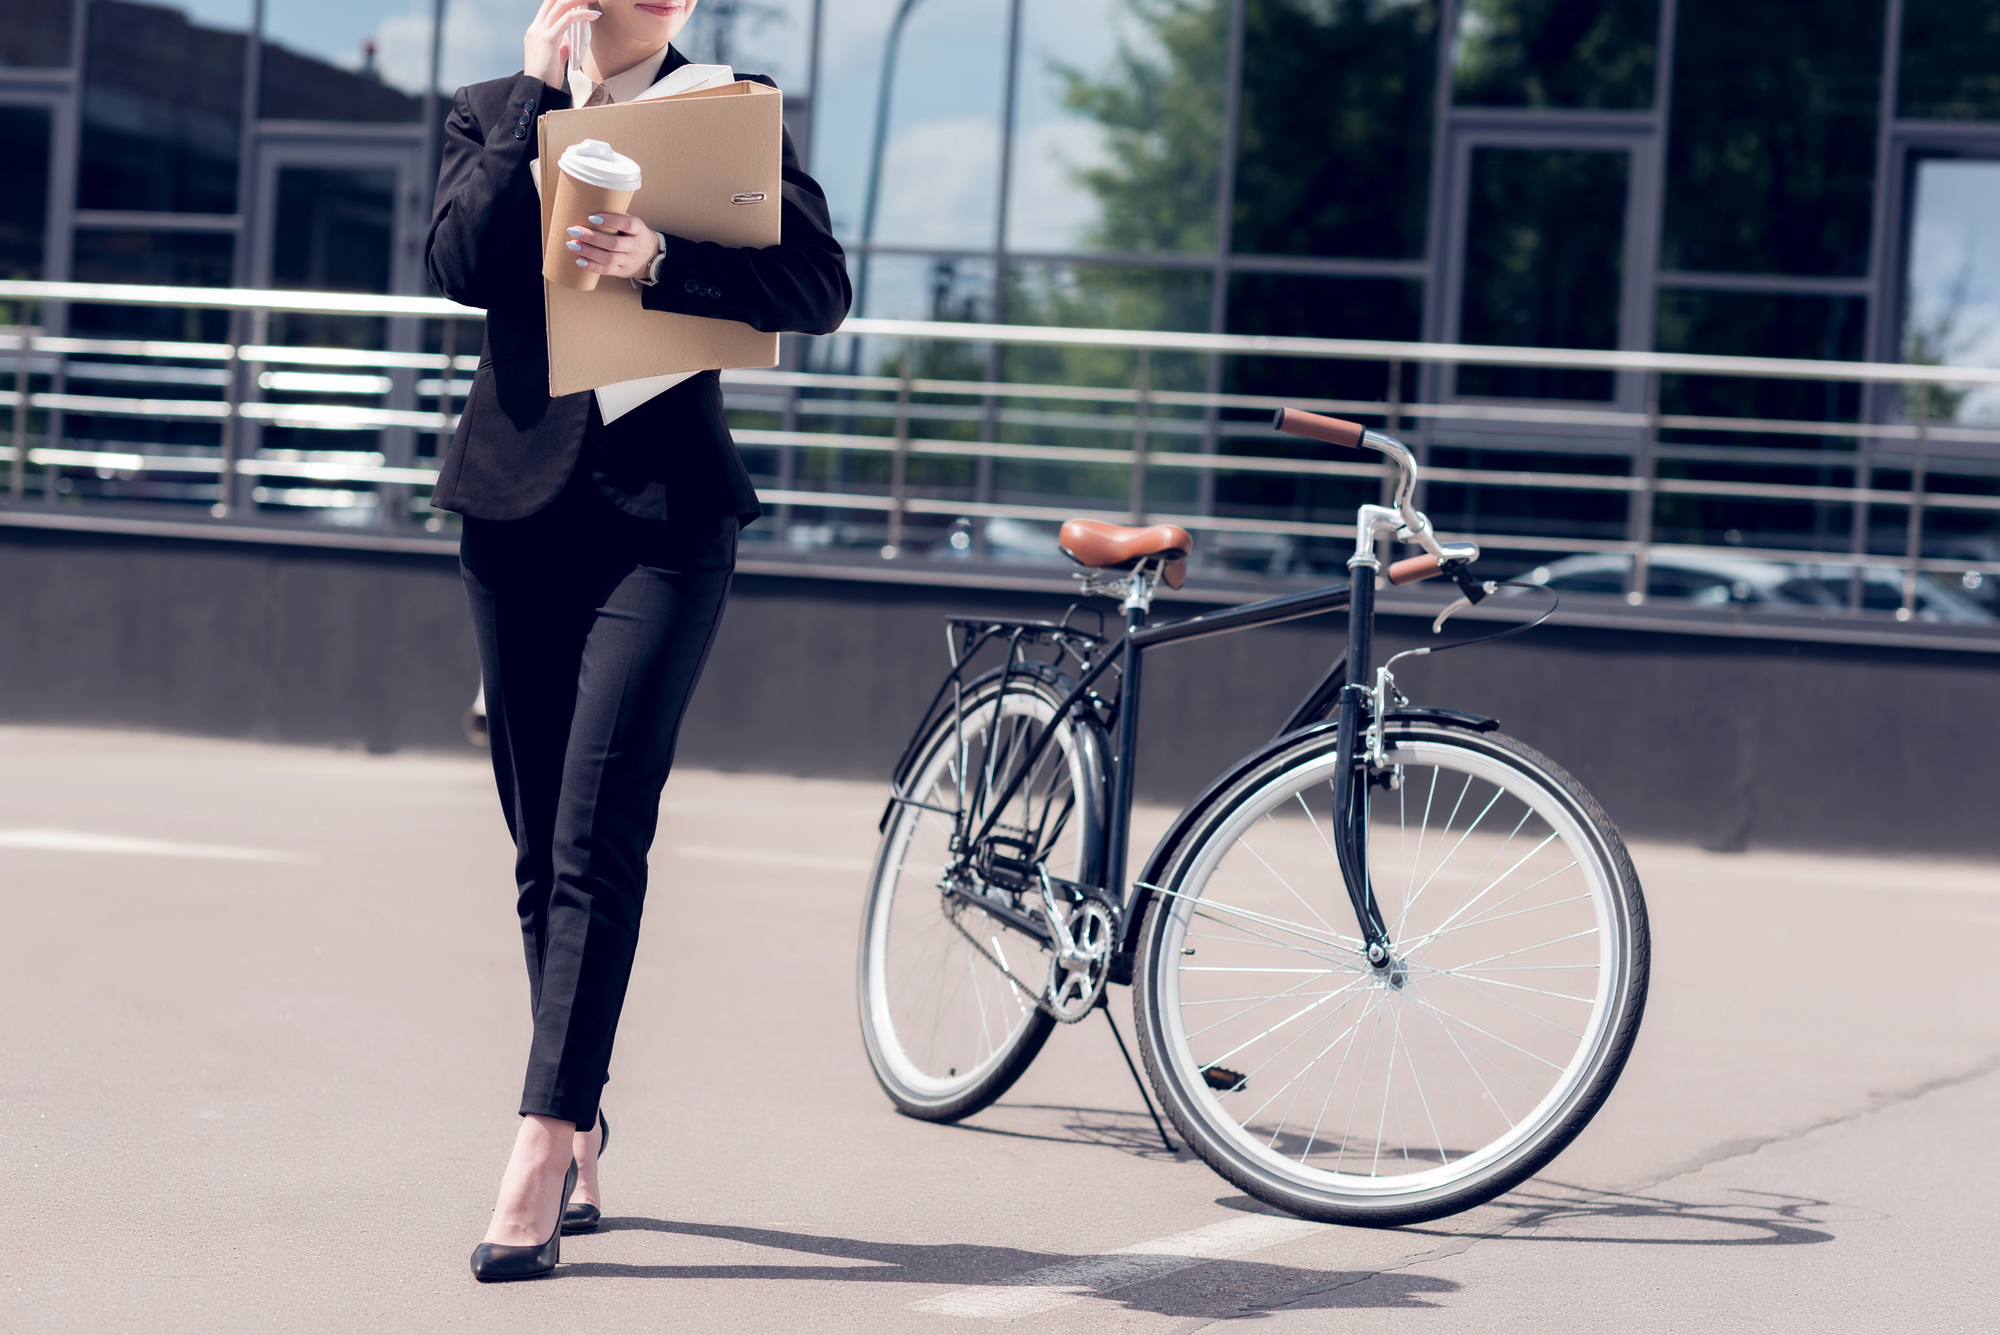 A person in business attire holding a coffee cup and folder is talking on the phone while walking past a bicycle. The person is in front of a modern building with large windows. The bicycle is parked nearby, and the environment appears urban.